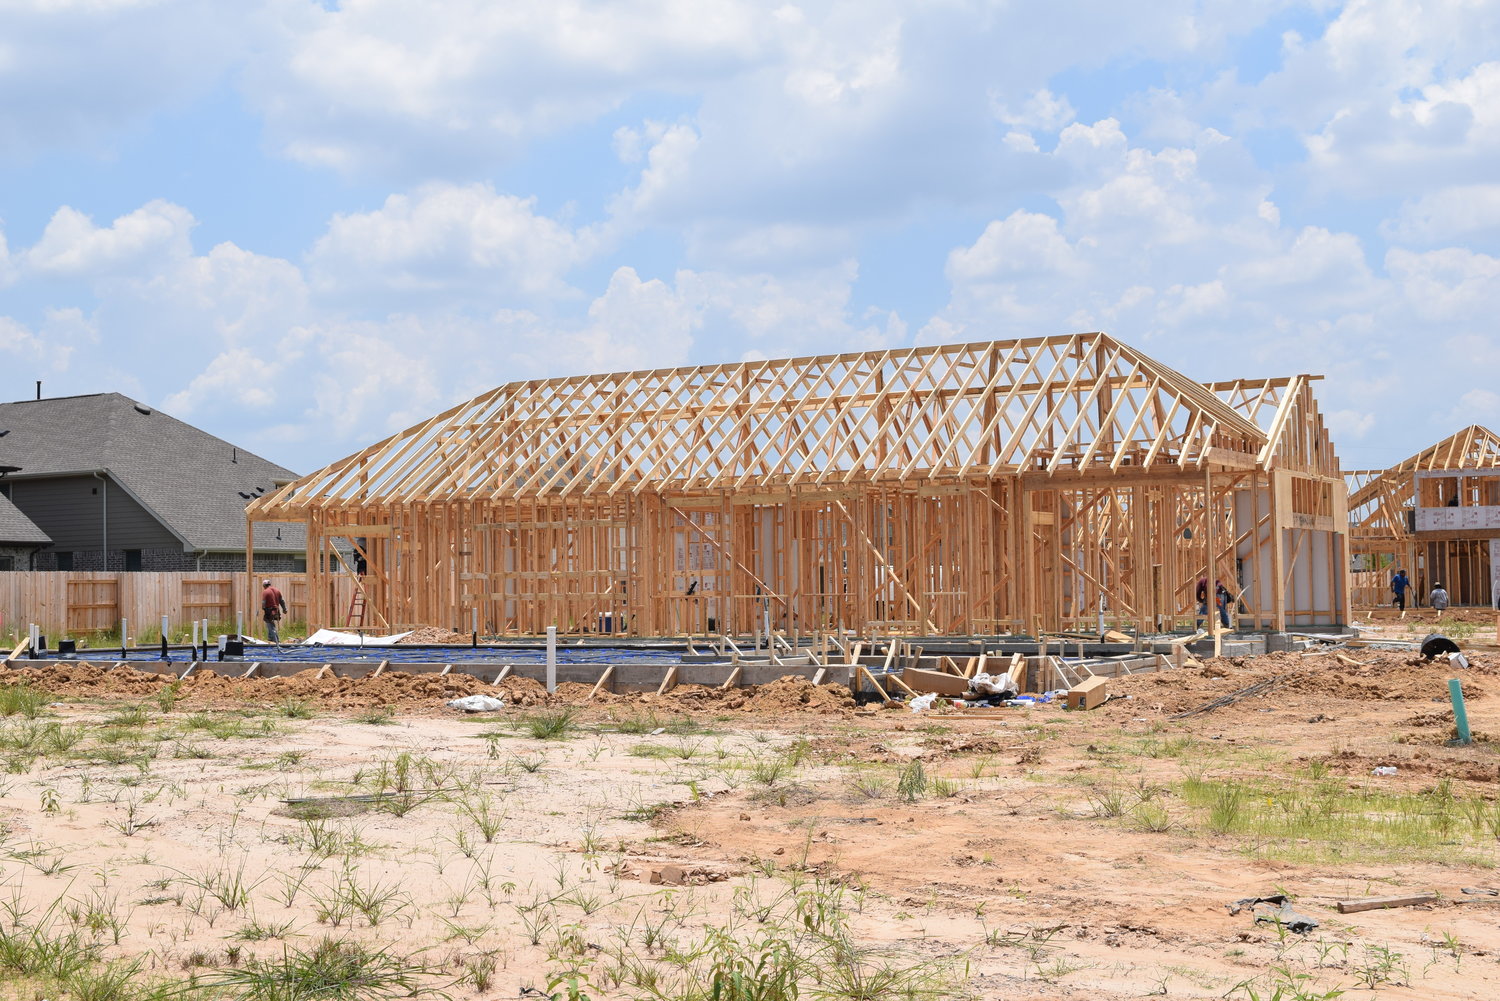 Workers continue to build homes in the Elyson subdivision along FM 529 in the northern portion of the Katy area. Builders have been hard-pressed to find lumber which experts say has increased in price by about 300% recently, in part due to the pandemic, though raw timber prices have remained steady.